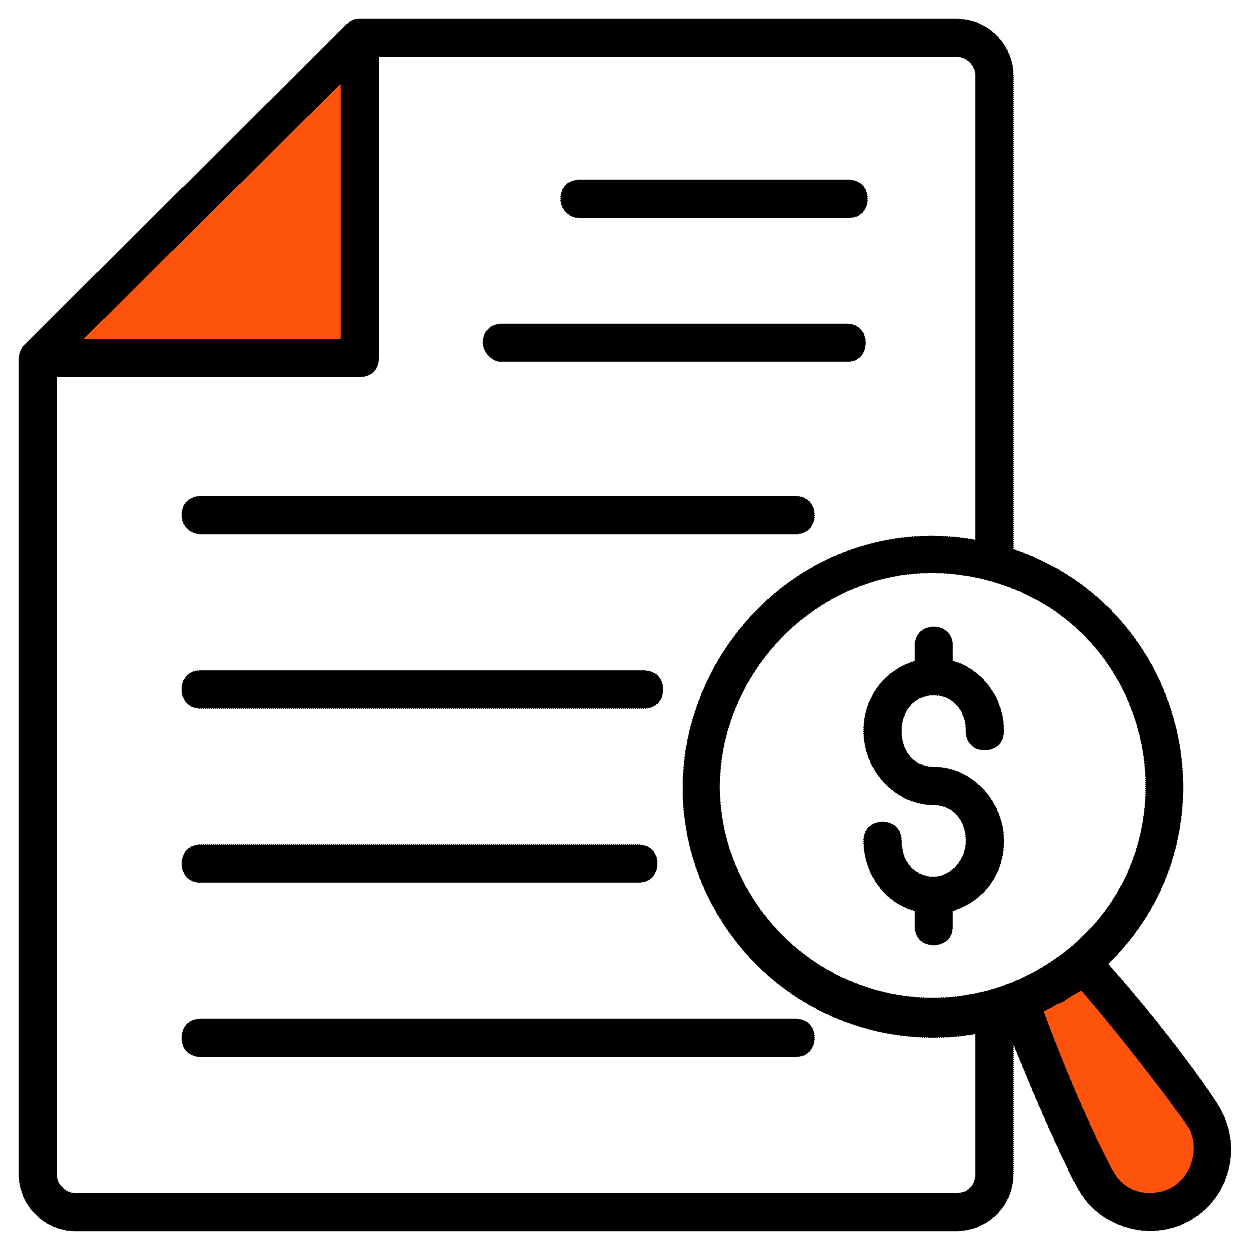 A graphic of a document and magnifying glass with a dollar sign in the middle of the glass.